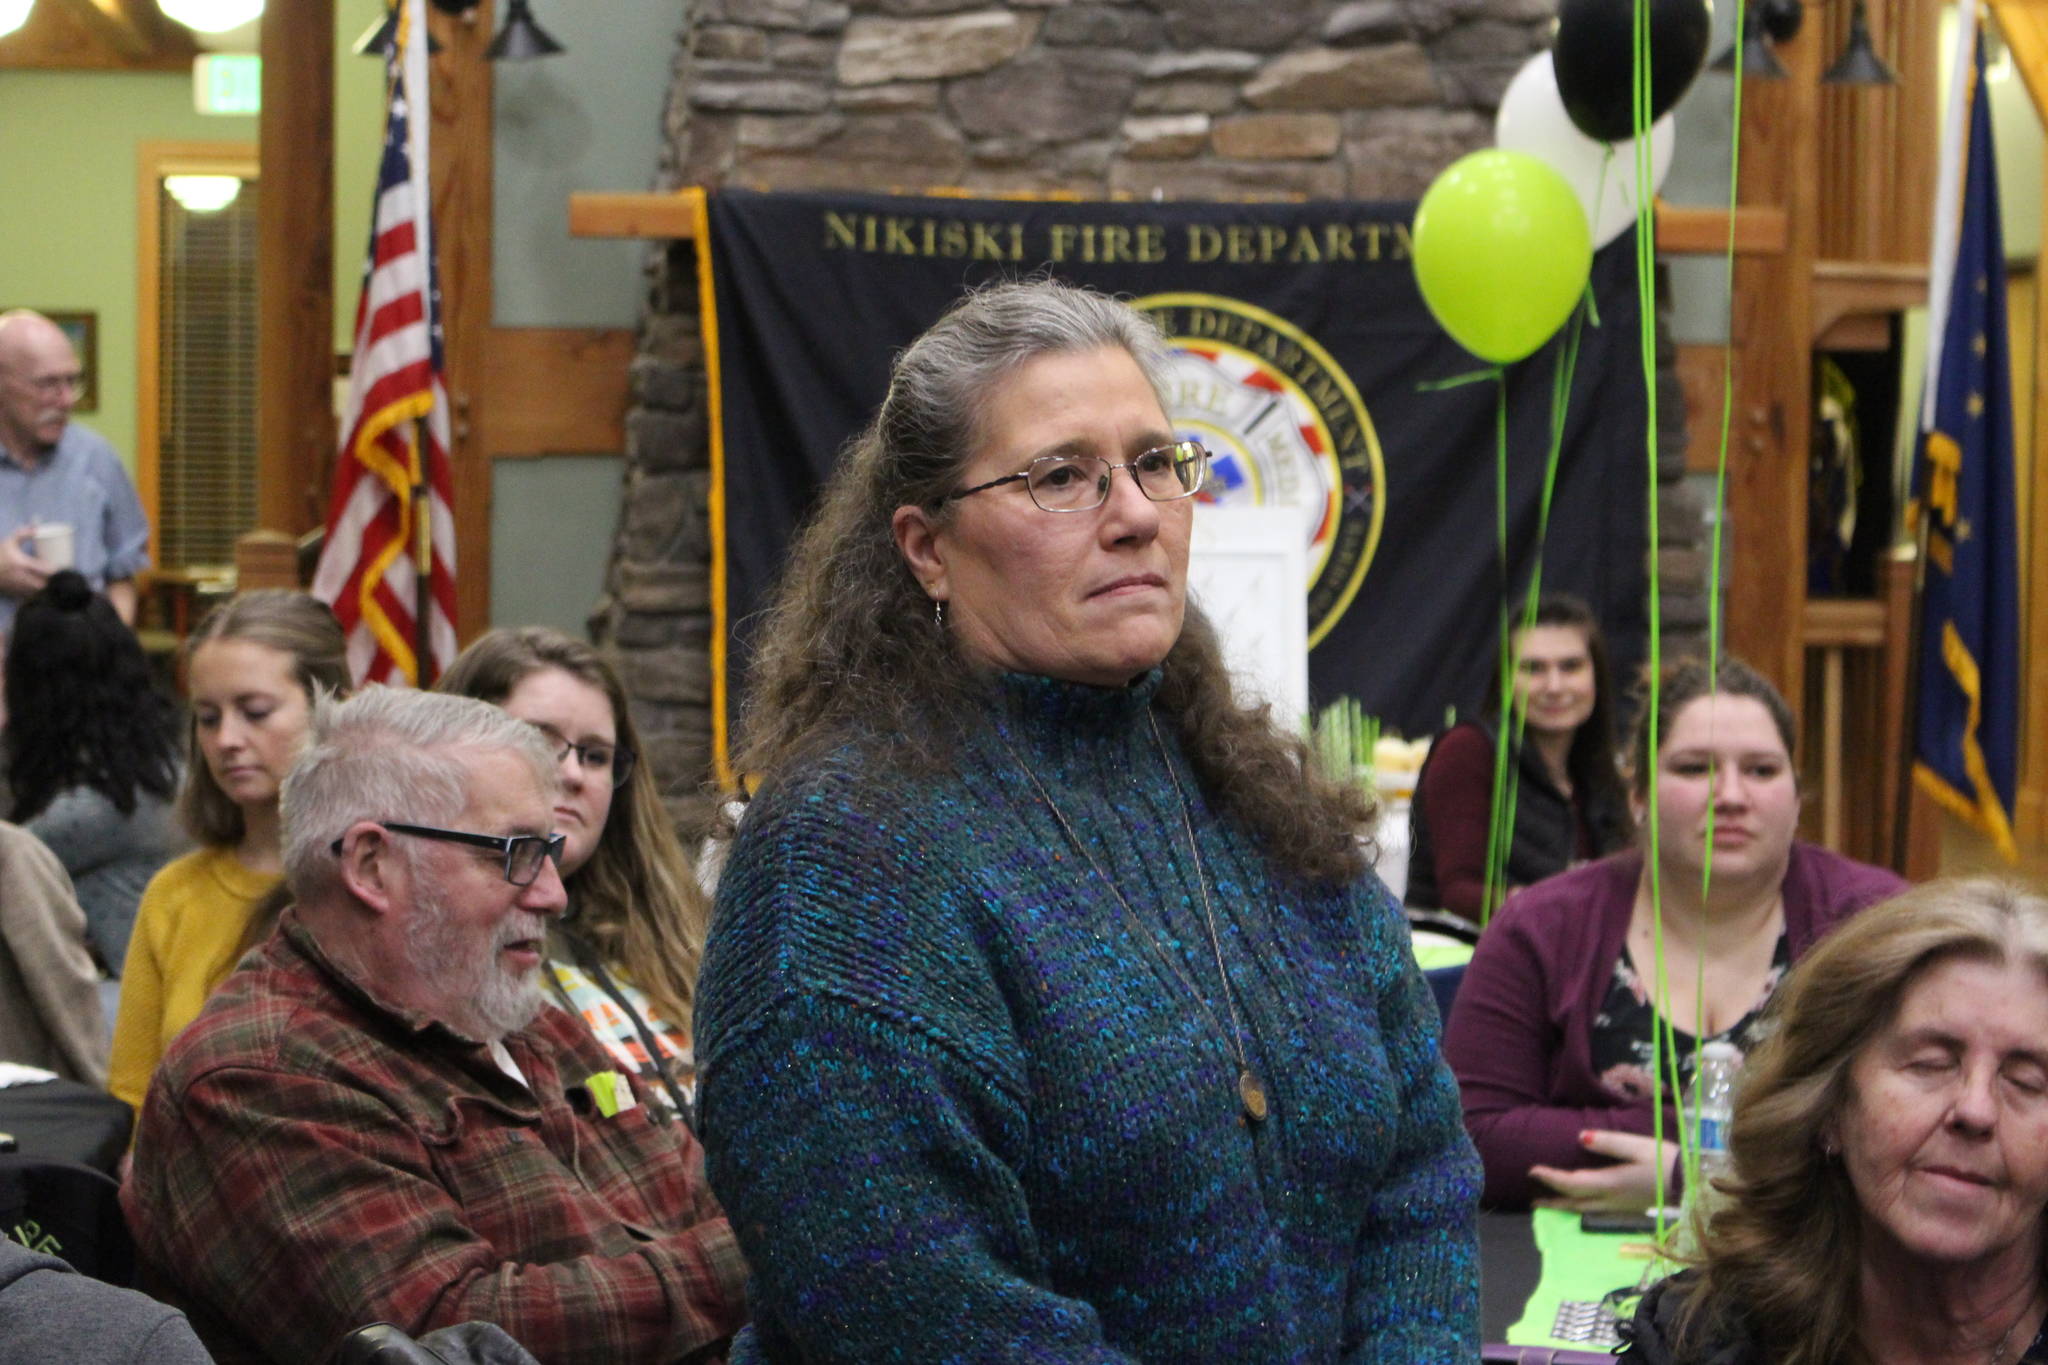 Brian Mazurek / Peninsula Clarion                                 Wildwood Correctional Officer Amy Fisher listens as the Nikiski Fire Department honors the first responders who played a part in saving her life last October during the Nikiski Fire Department’s 2019 Award Ceremony at the Nikiski Senior Center on Feb. 28.                                Wildwood Correctional Officer Amy Fisher listens as the Nikiski Fire Department honors the individuals who played a part in saving her life last October during the Nikiski Fire Department’s 2019 Award Ceremony in the Nikiski Senior Center on Feb. 28, 2020. (Photo by Brian Mazurek/Peninsula Clarion)